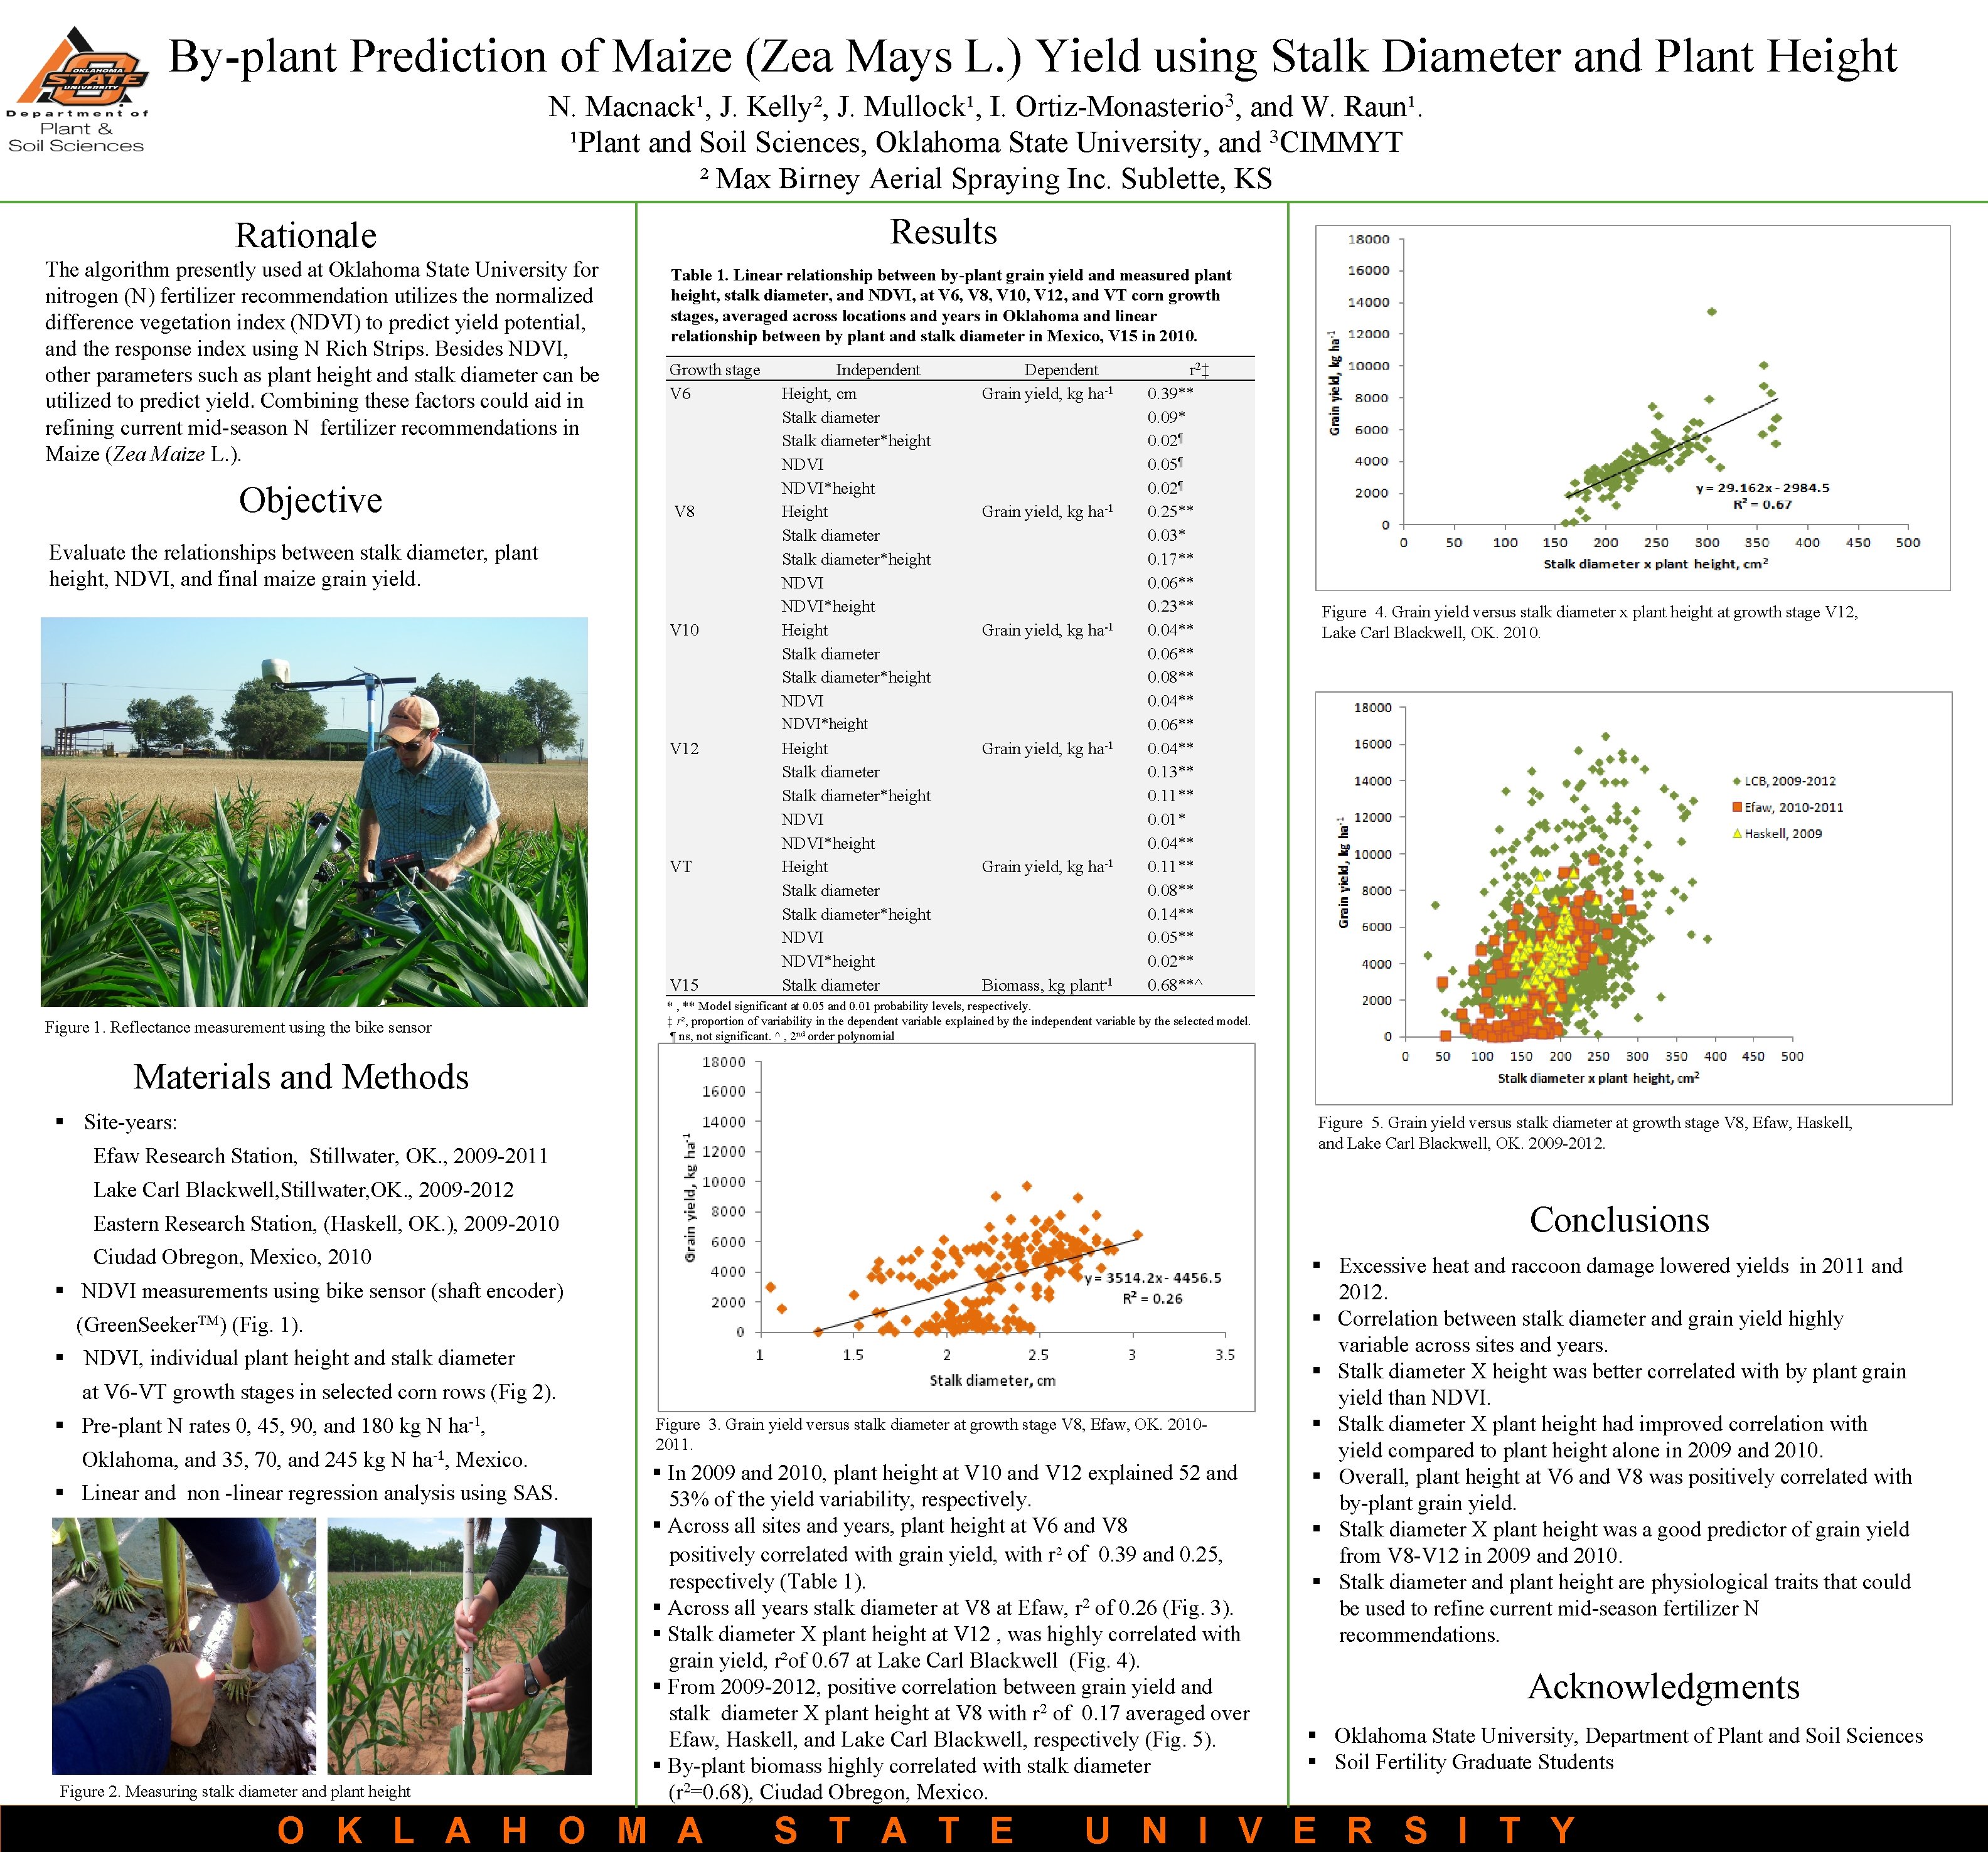 By-plant Prediction of Maize (Zea Mays L. ) Yield using Stalk Diameter and Plant